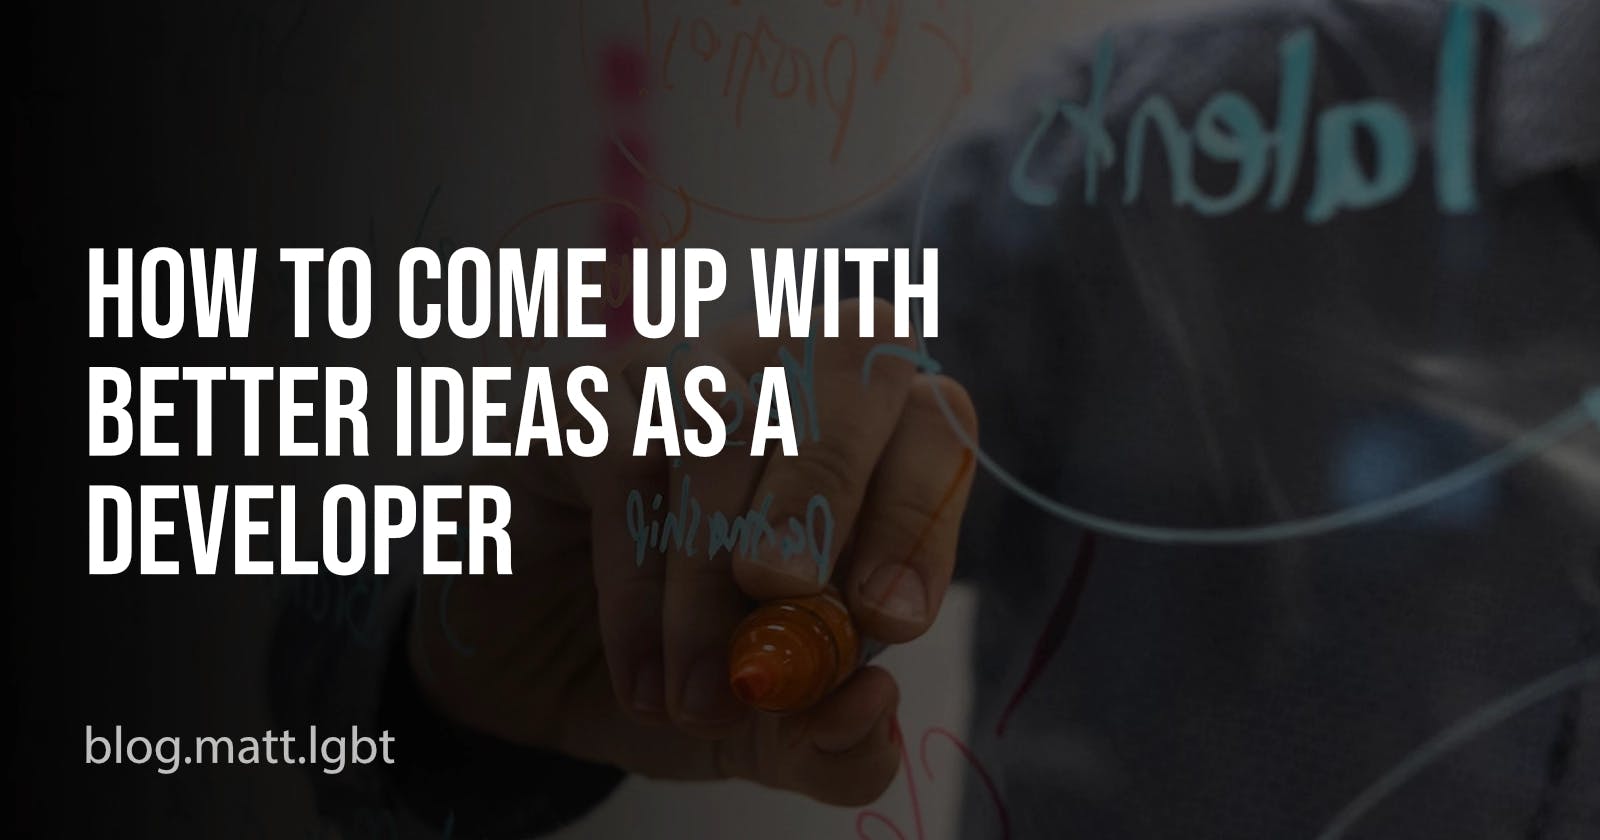 How to come up with better ideas as a developer